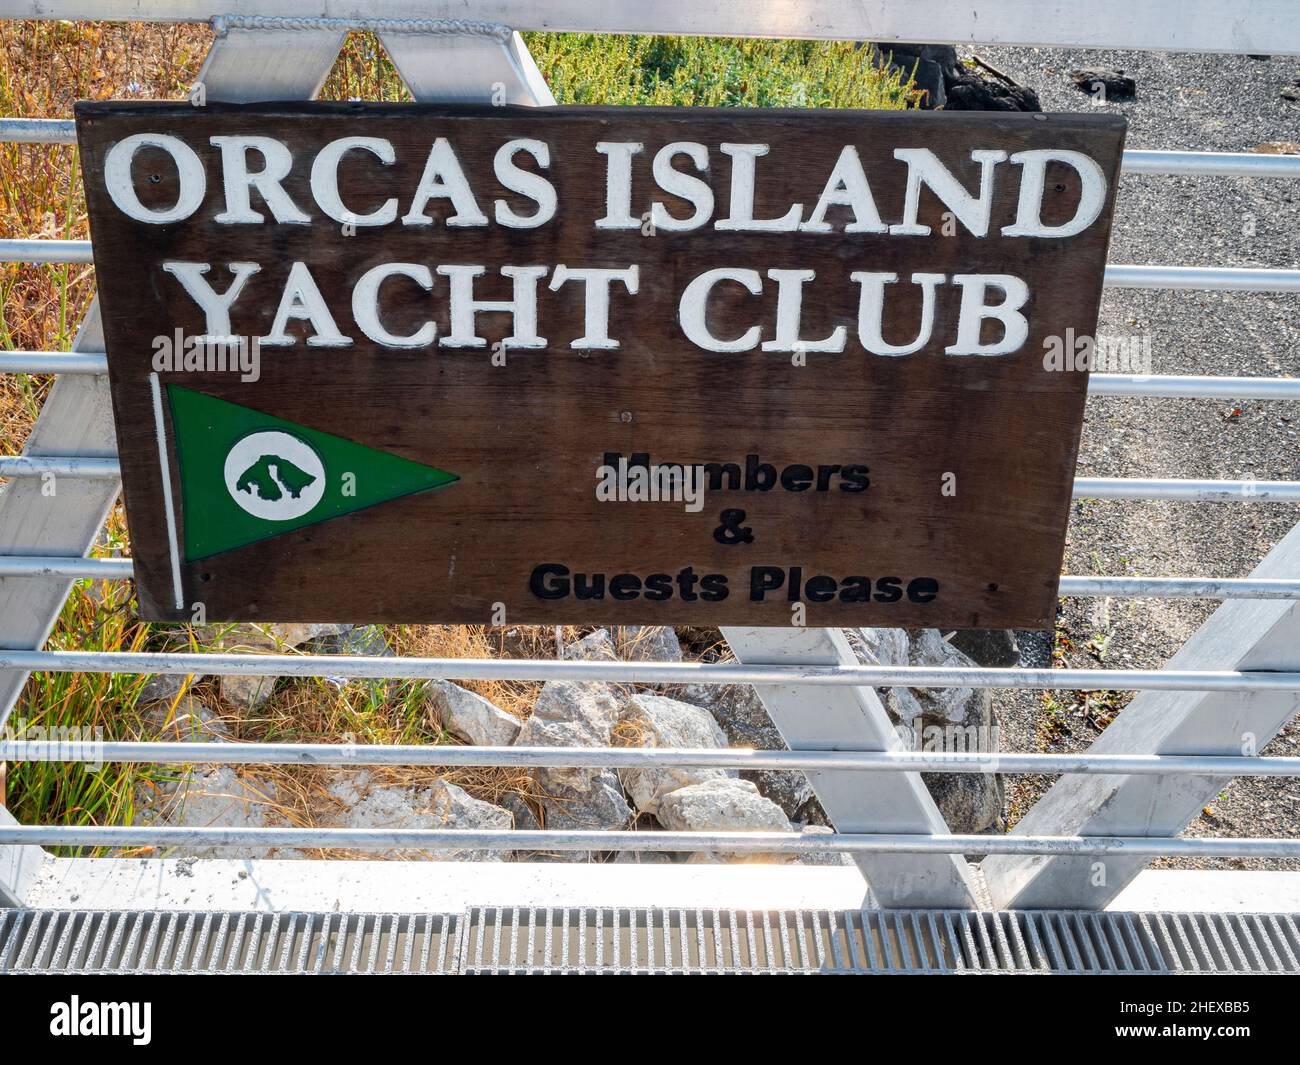 WA21083-00...WASHINGTON - Sign on the private dock of the Orcas Island Yacht Club on Orcas Island's West Sound. Stock Photo